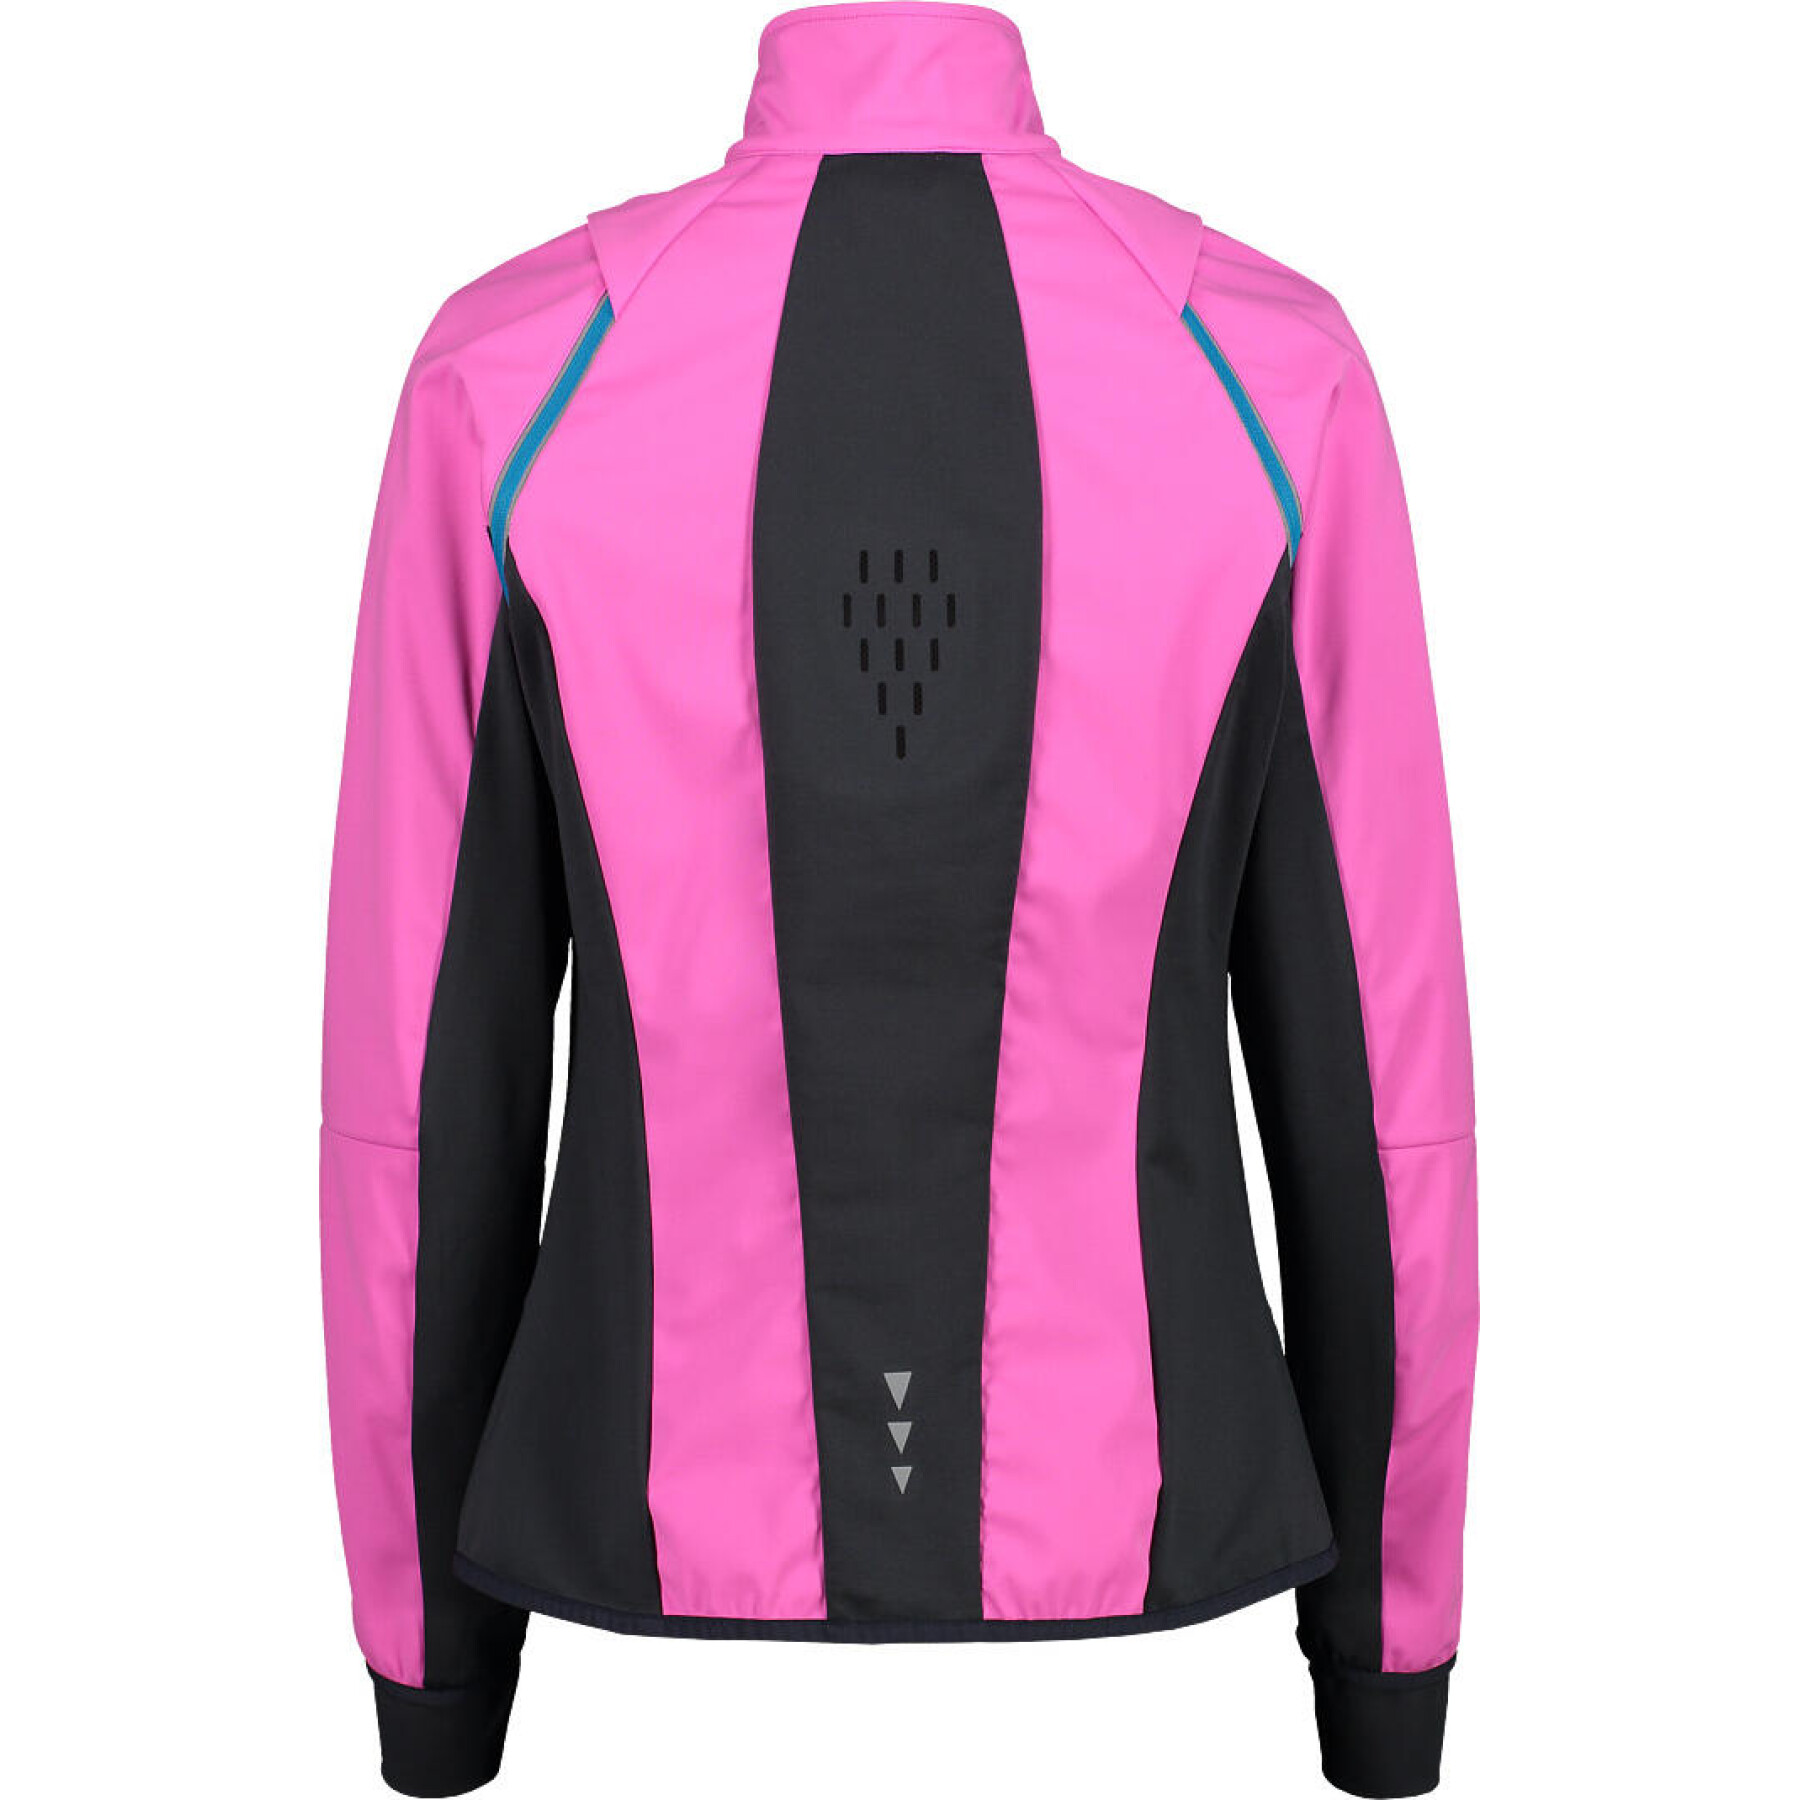 Women's hybrid jacket with detachable sleeves CMP